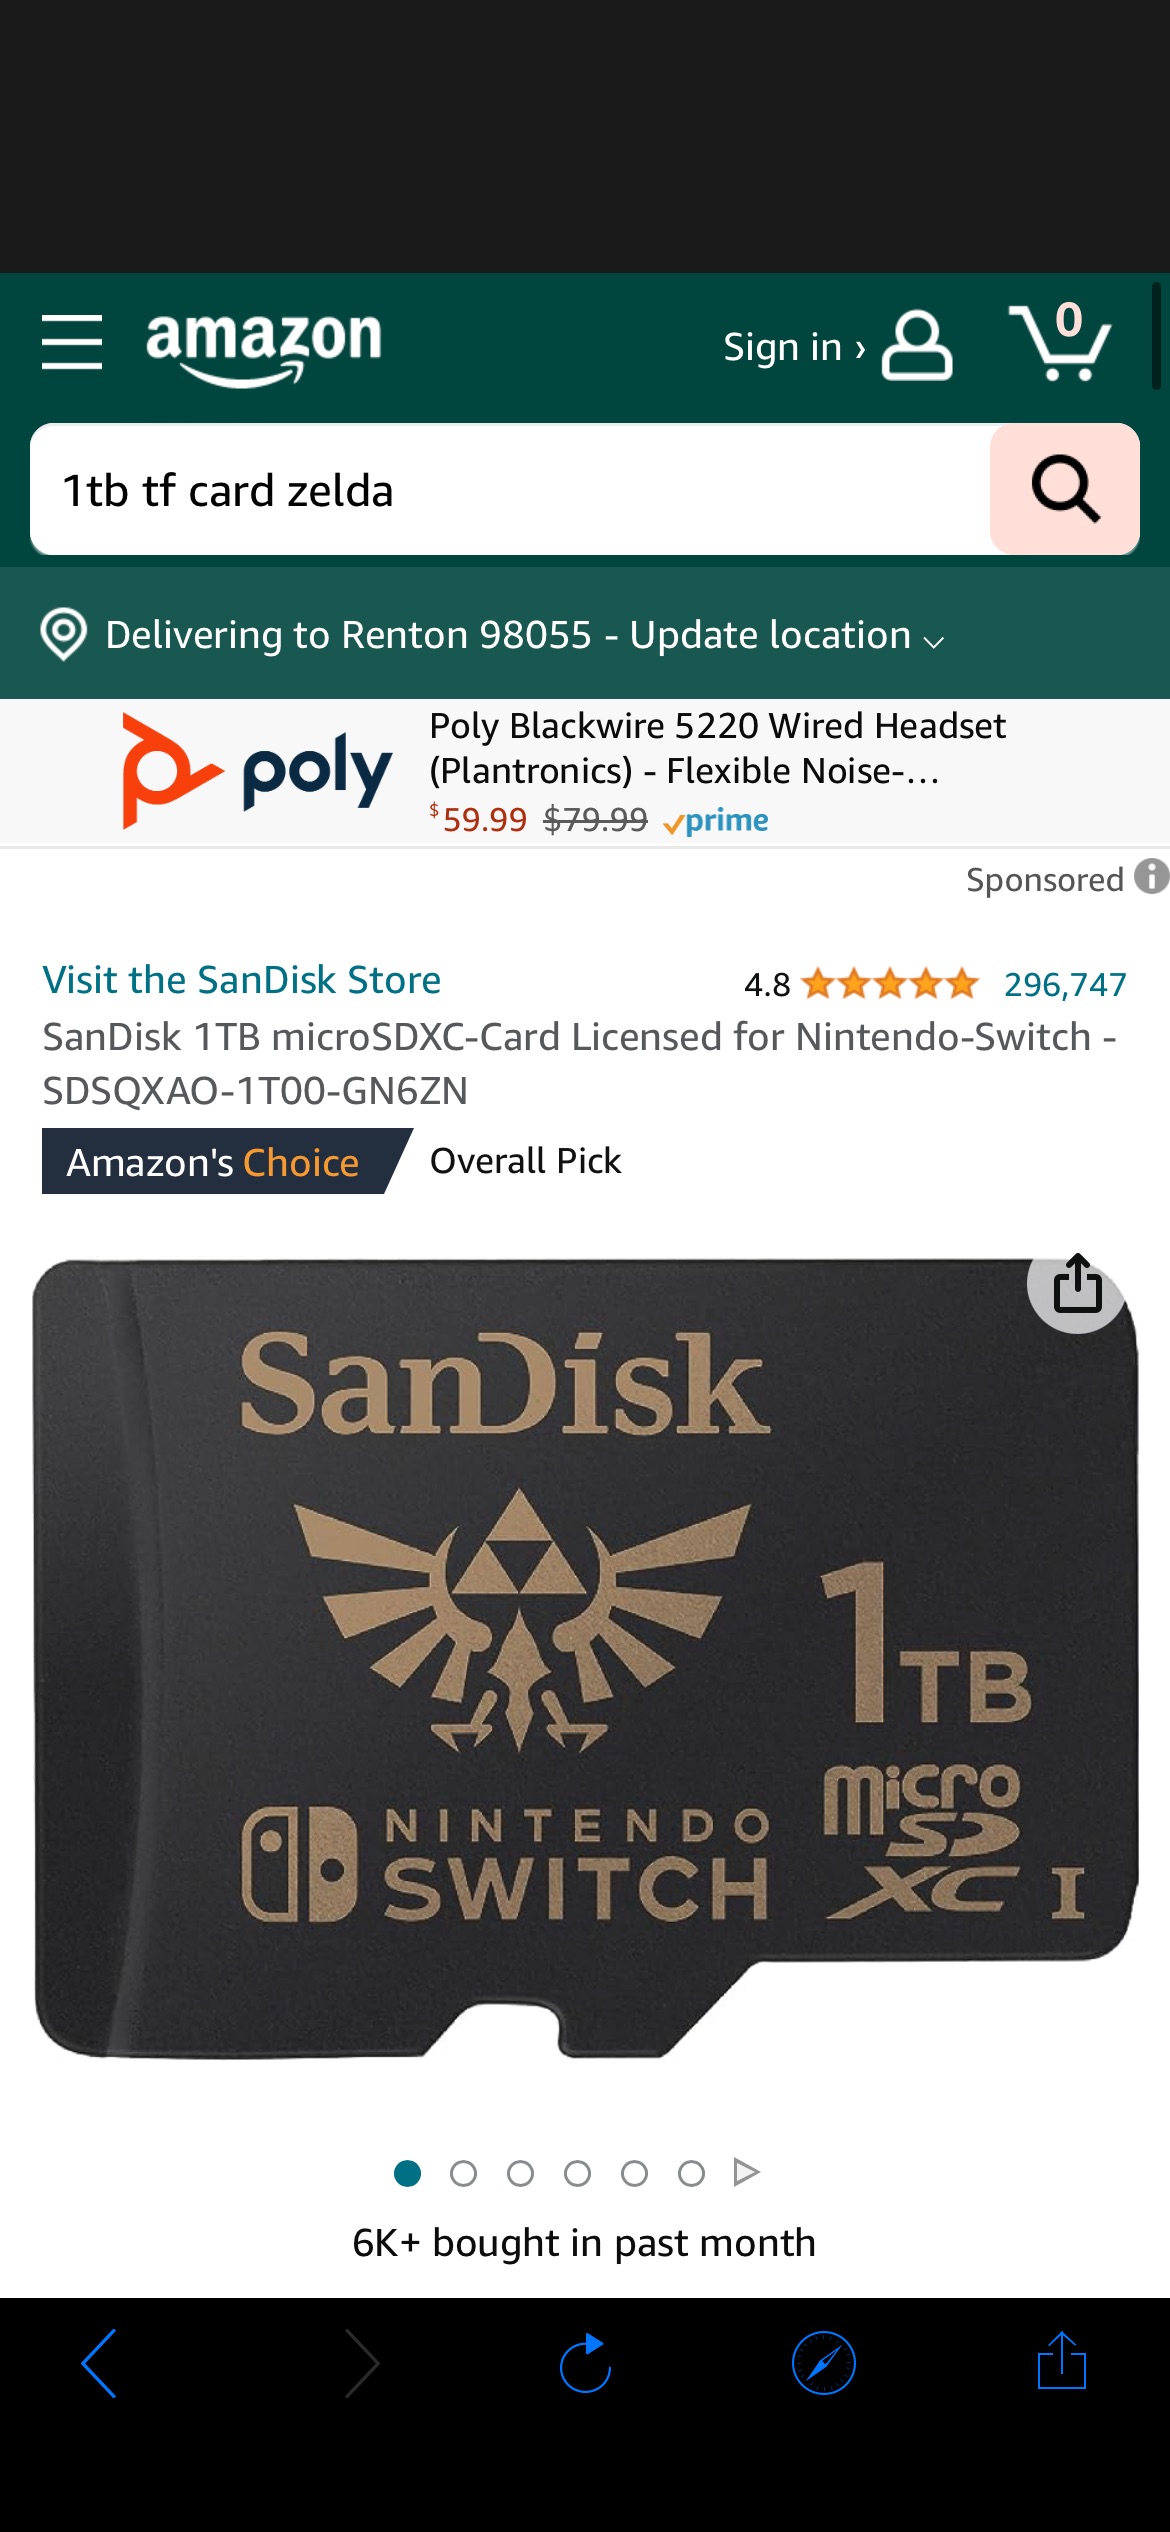 Amazon.com: SanDisk 1TB microSDXC-Card Licensed for Nintendo-Switch - SDSQXAO-1T00-GN6ZN : Video Games